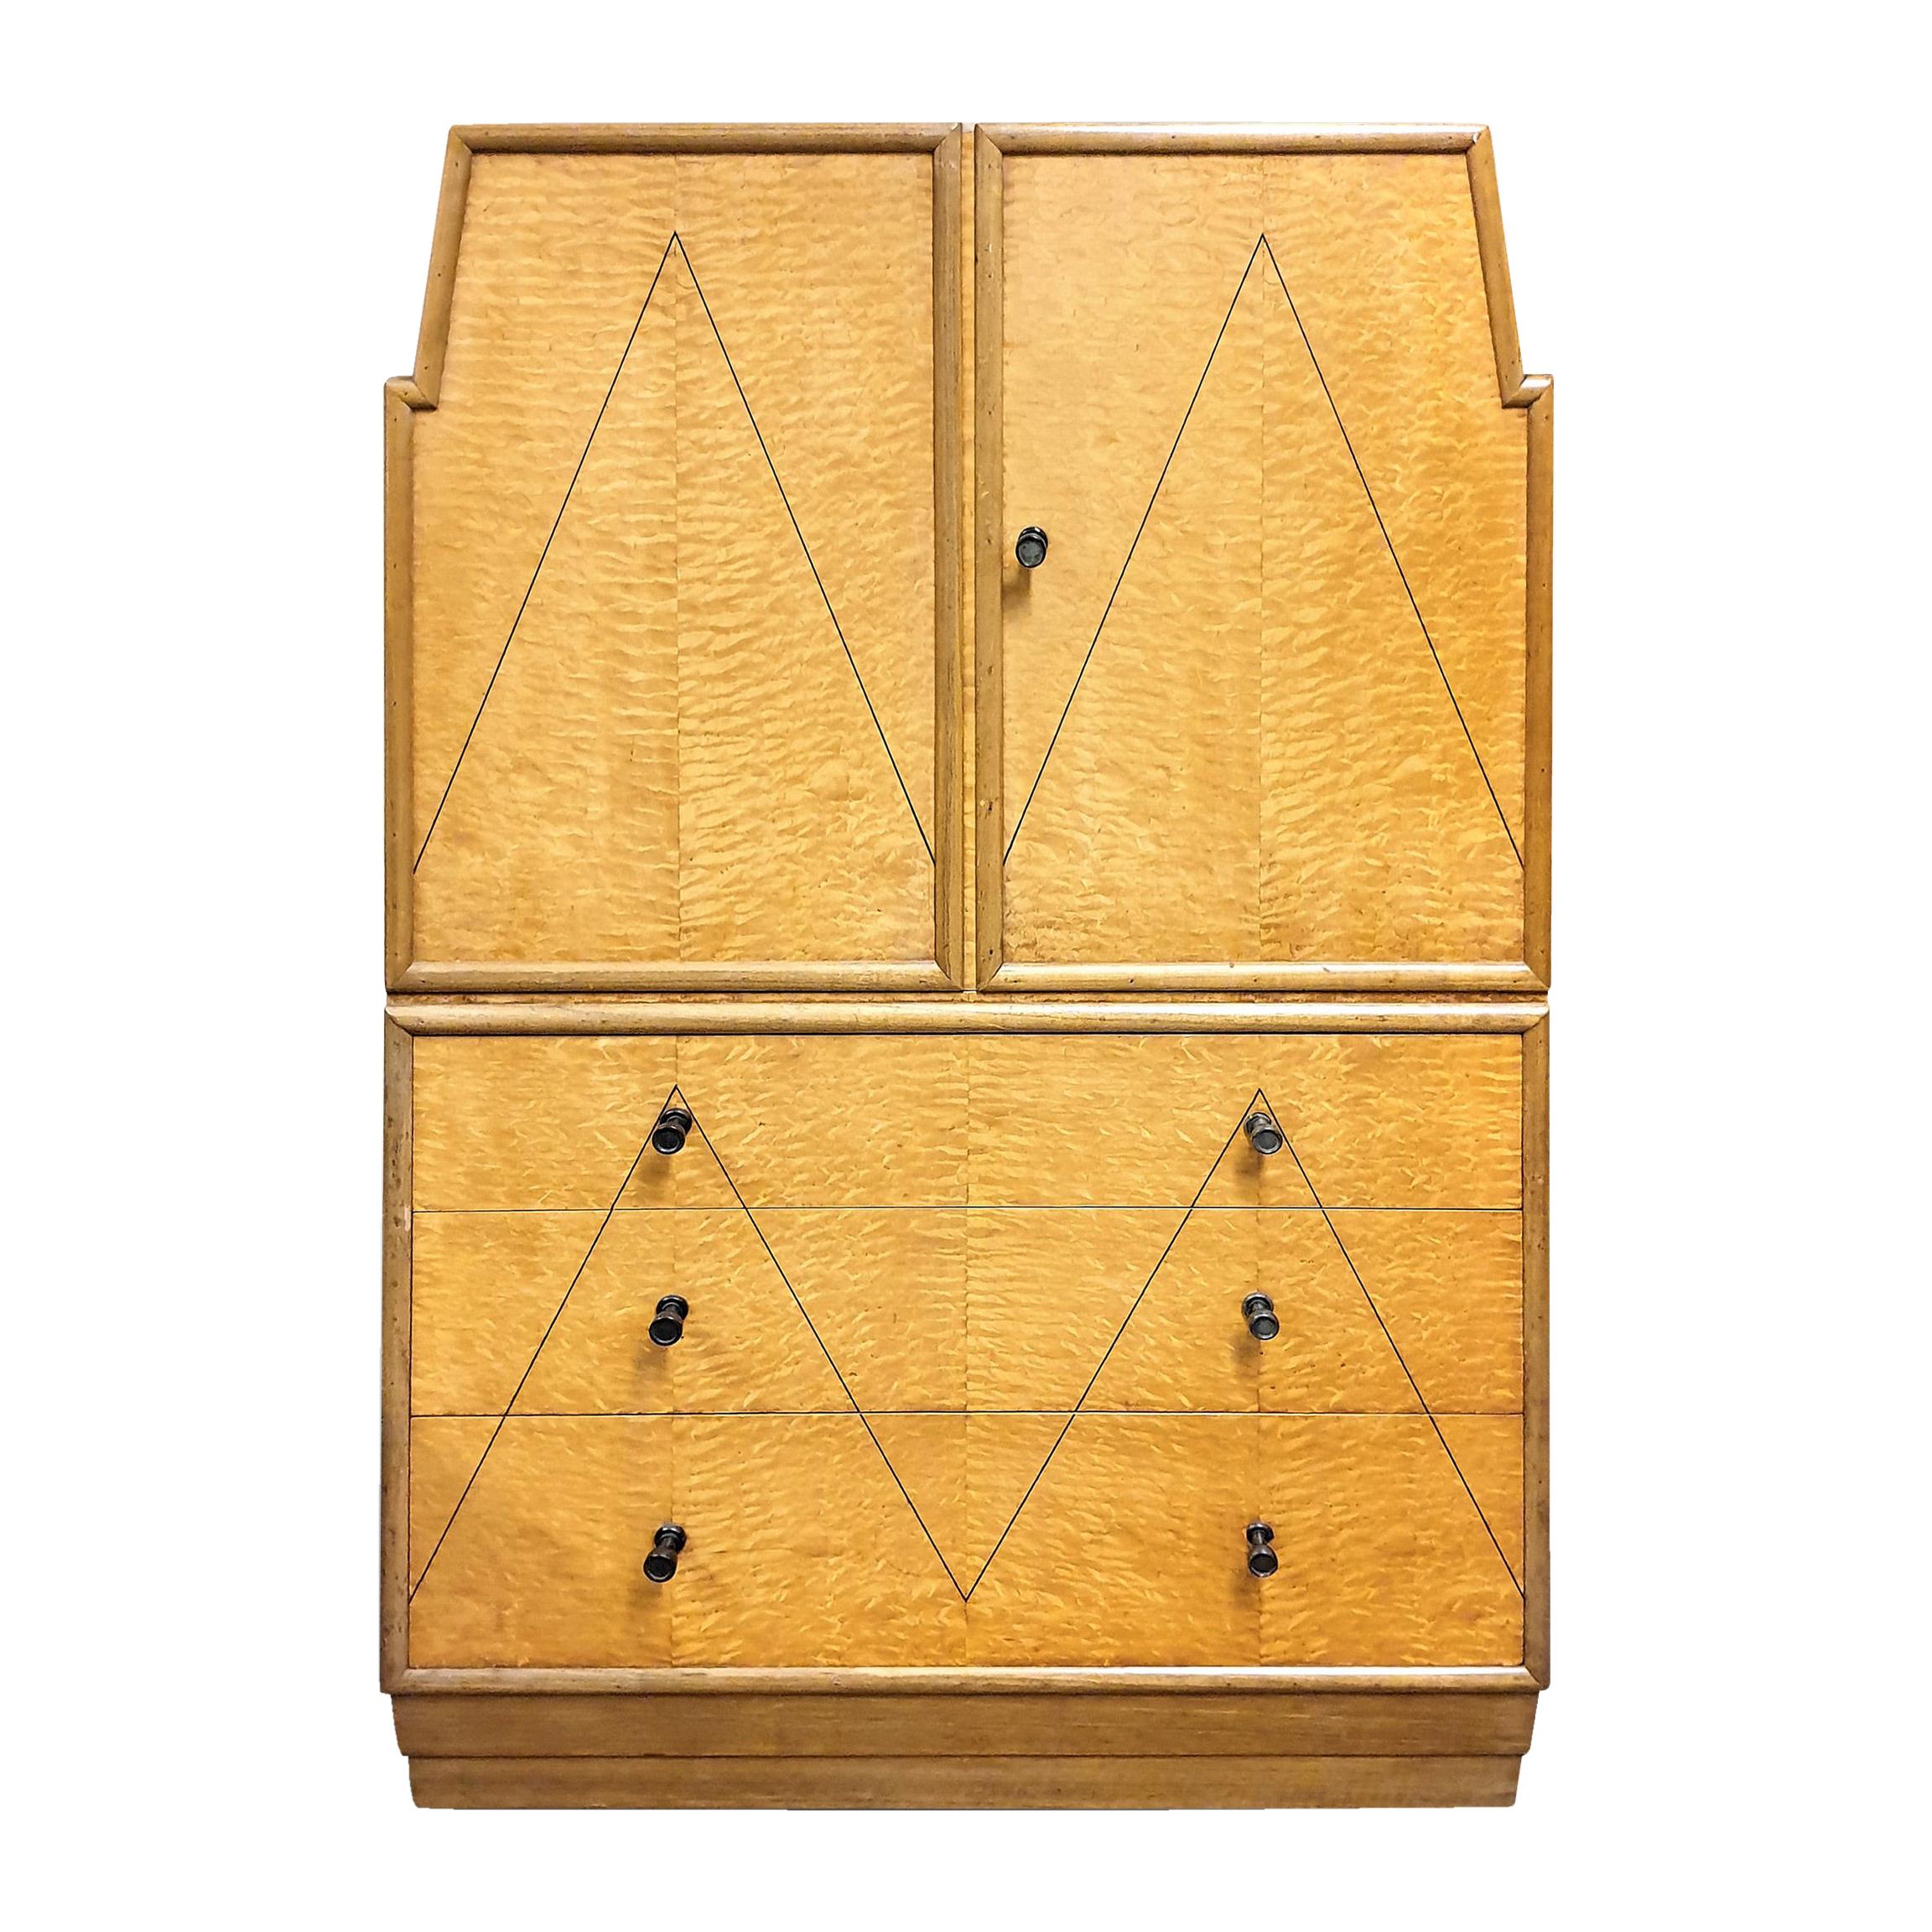 Art Deco Cabinet with Drawers Attributed to Sir Ambrose Heal